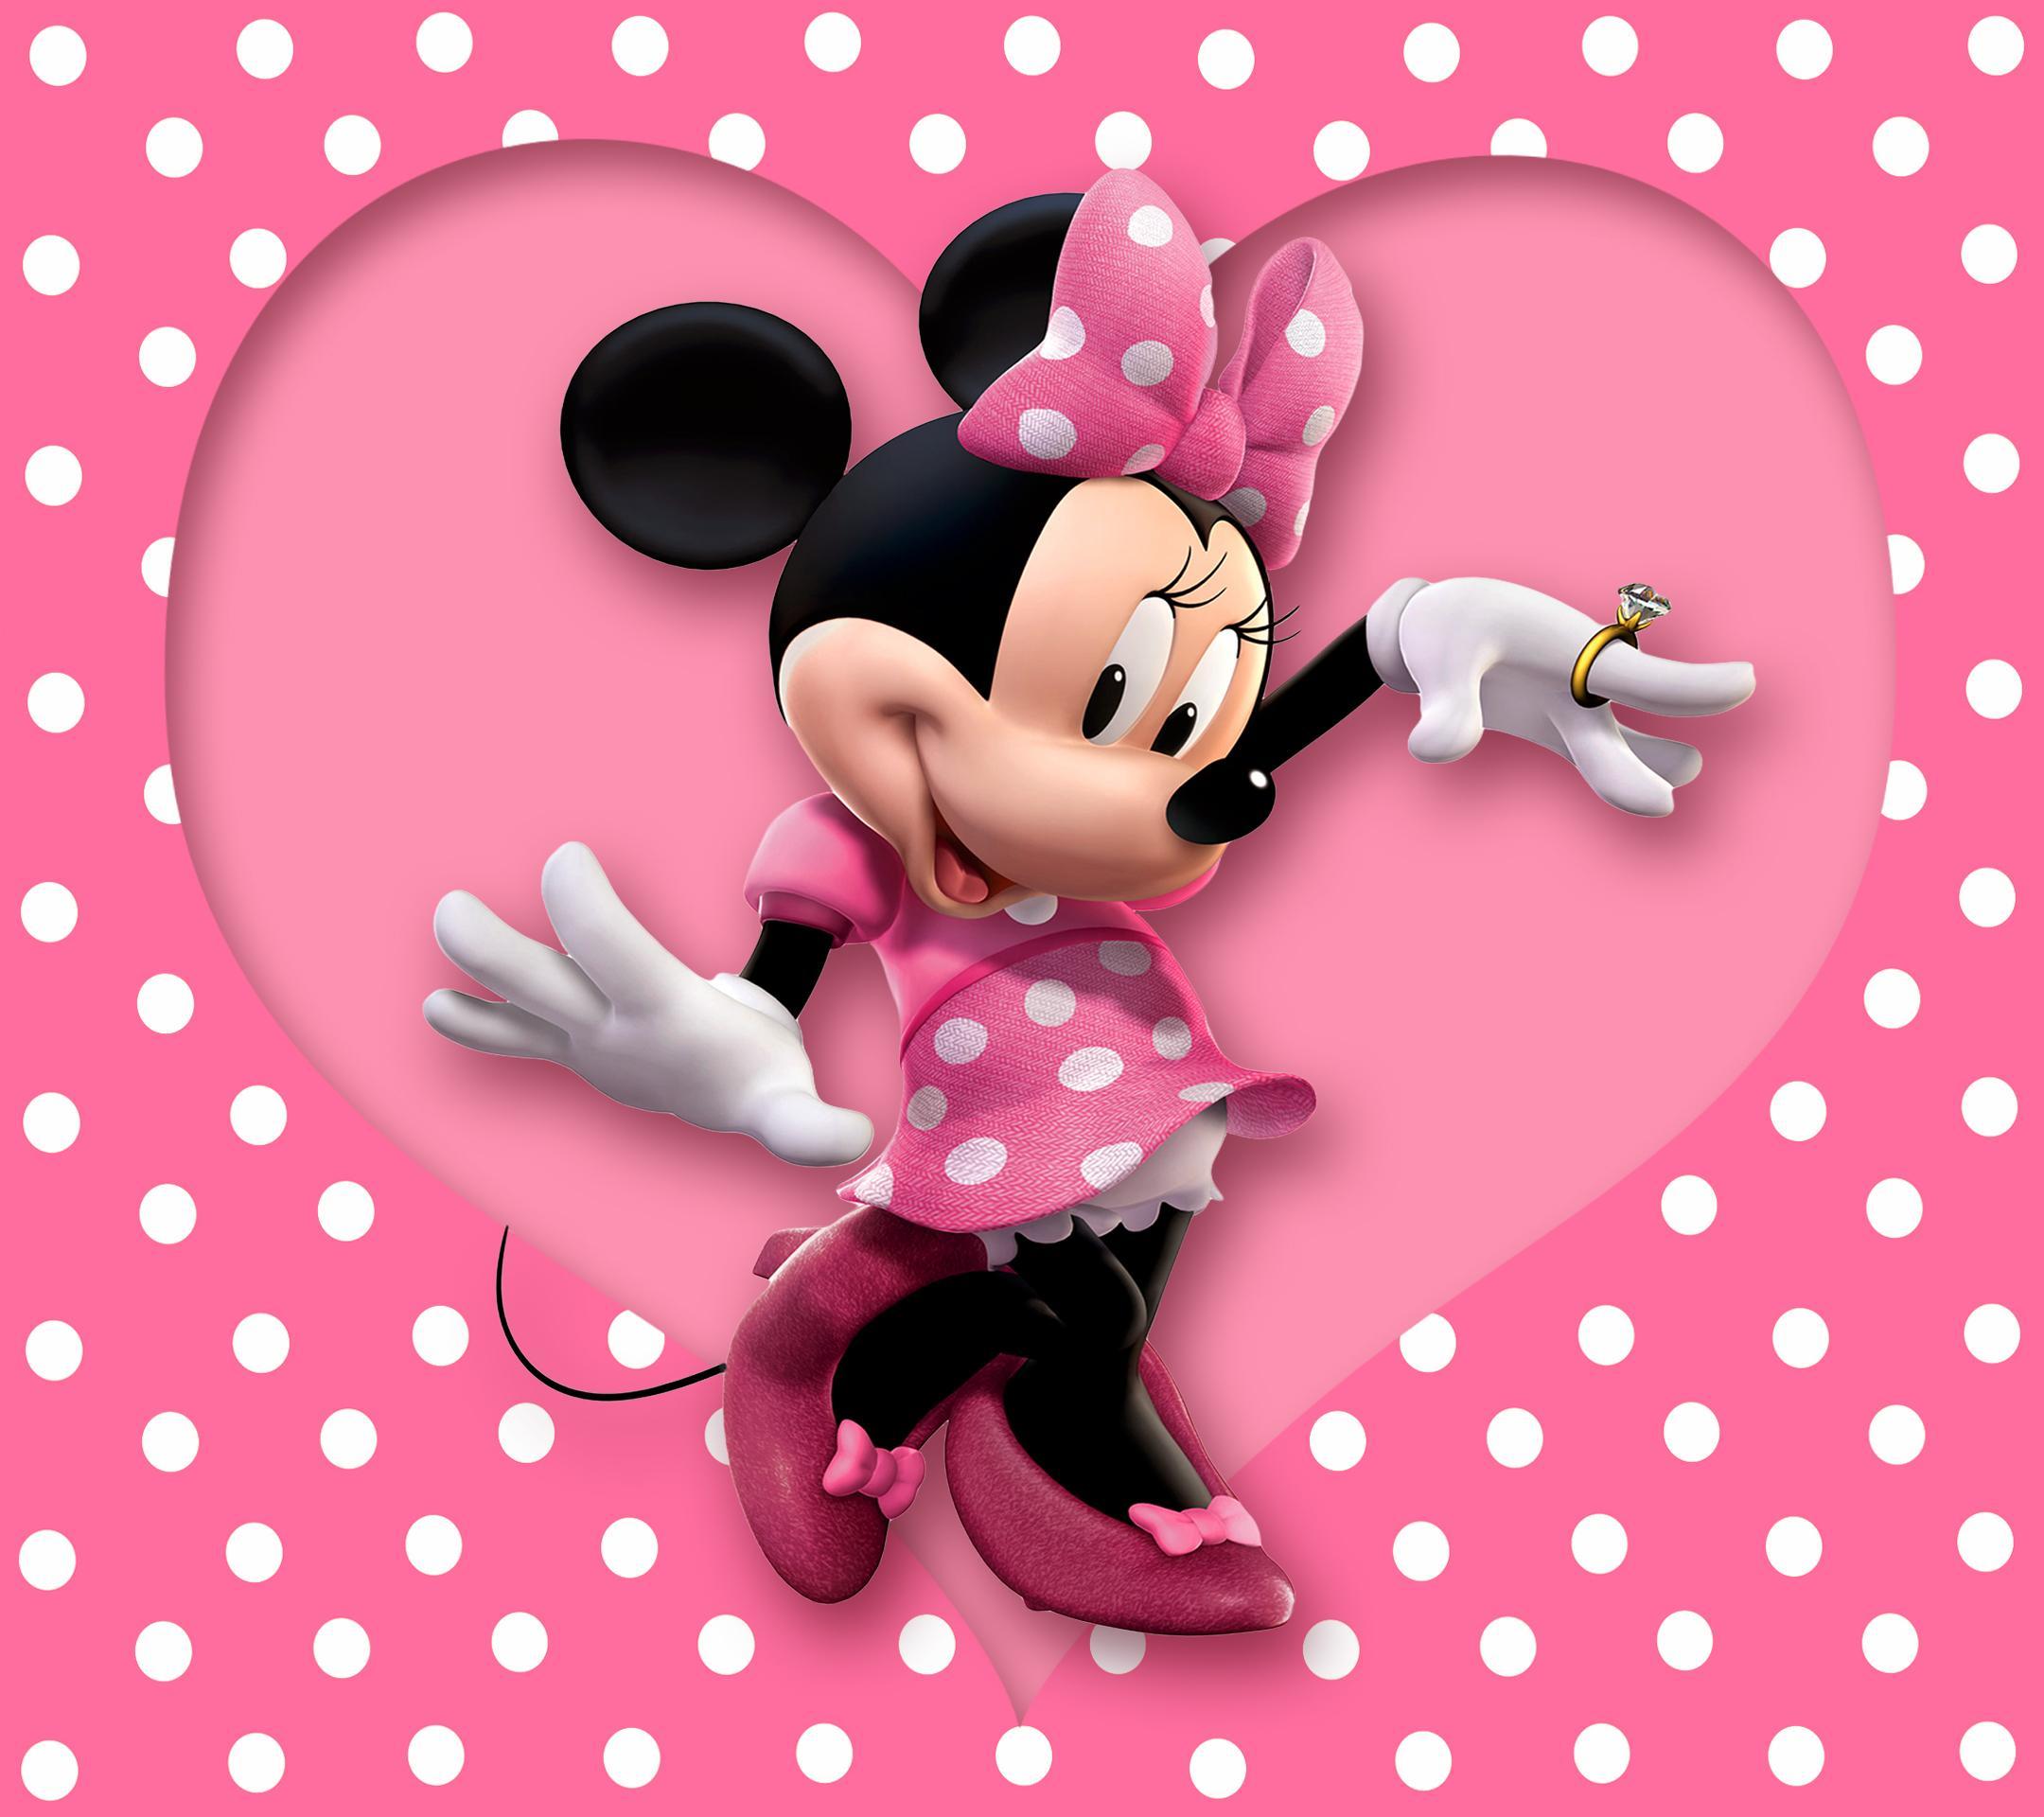 Minnie Mouse Wallpaper Hd For Android Apk Download